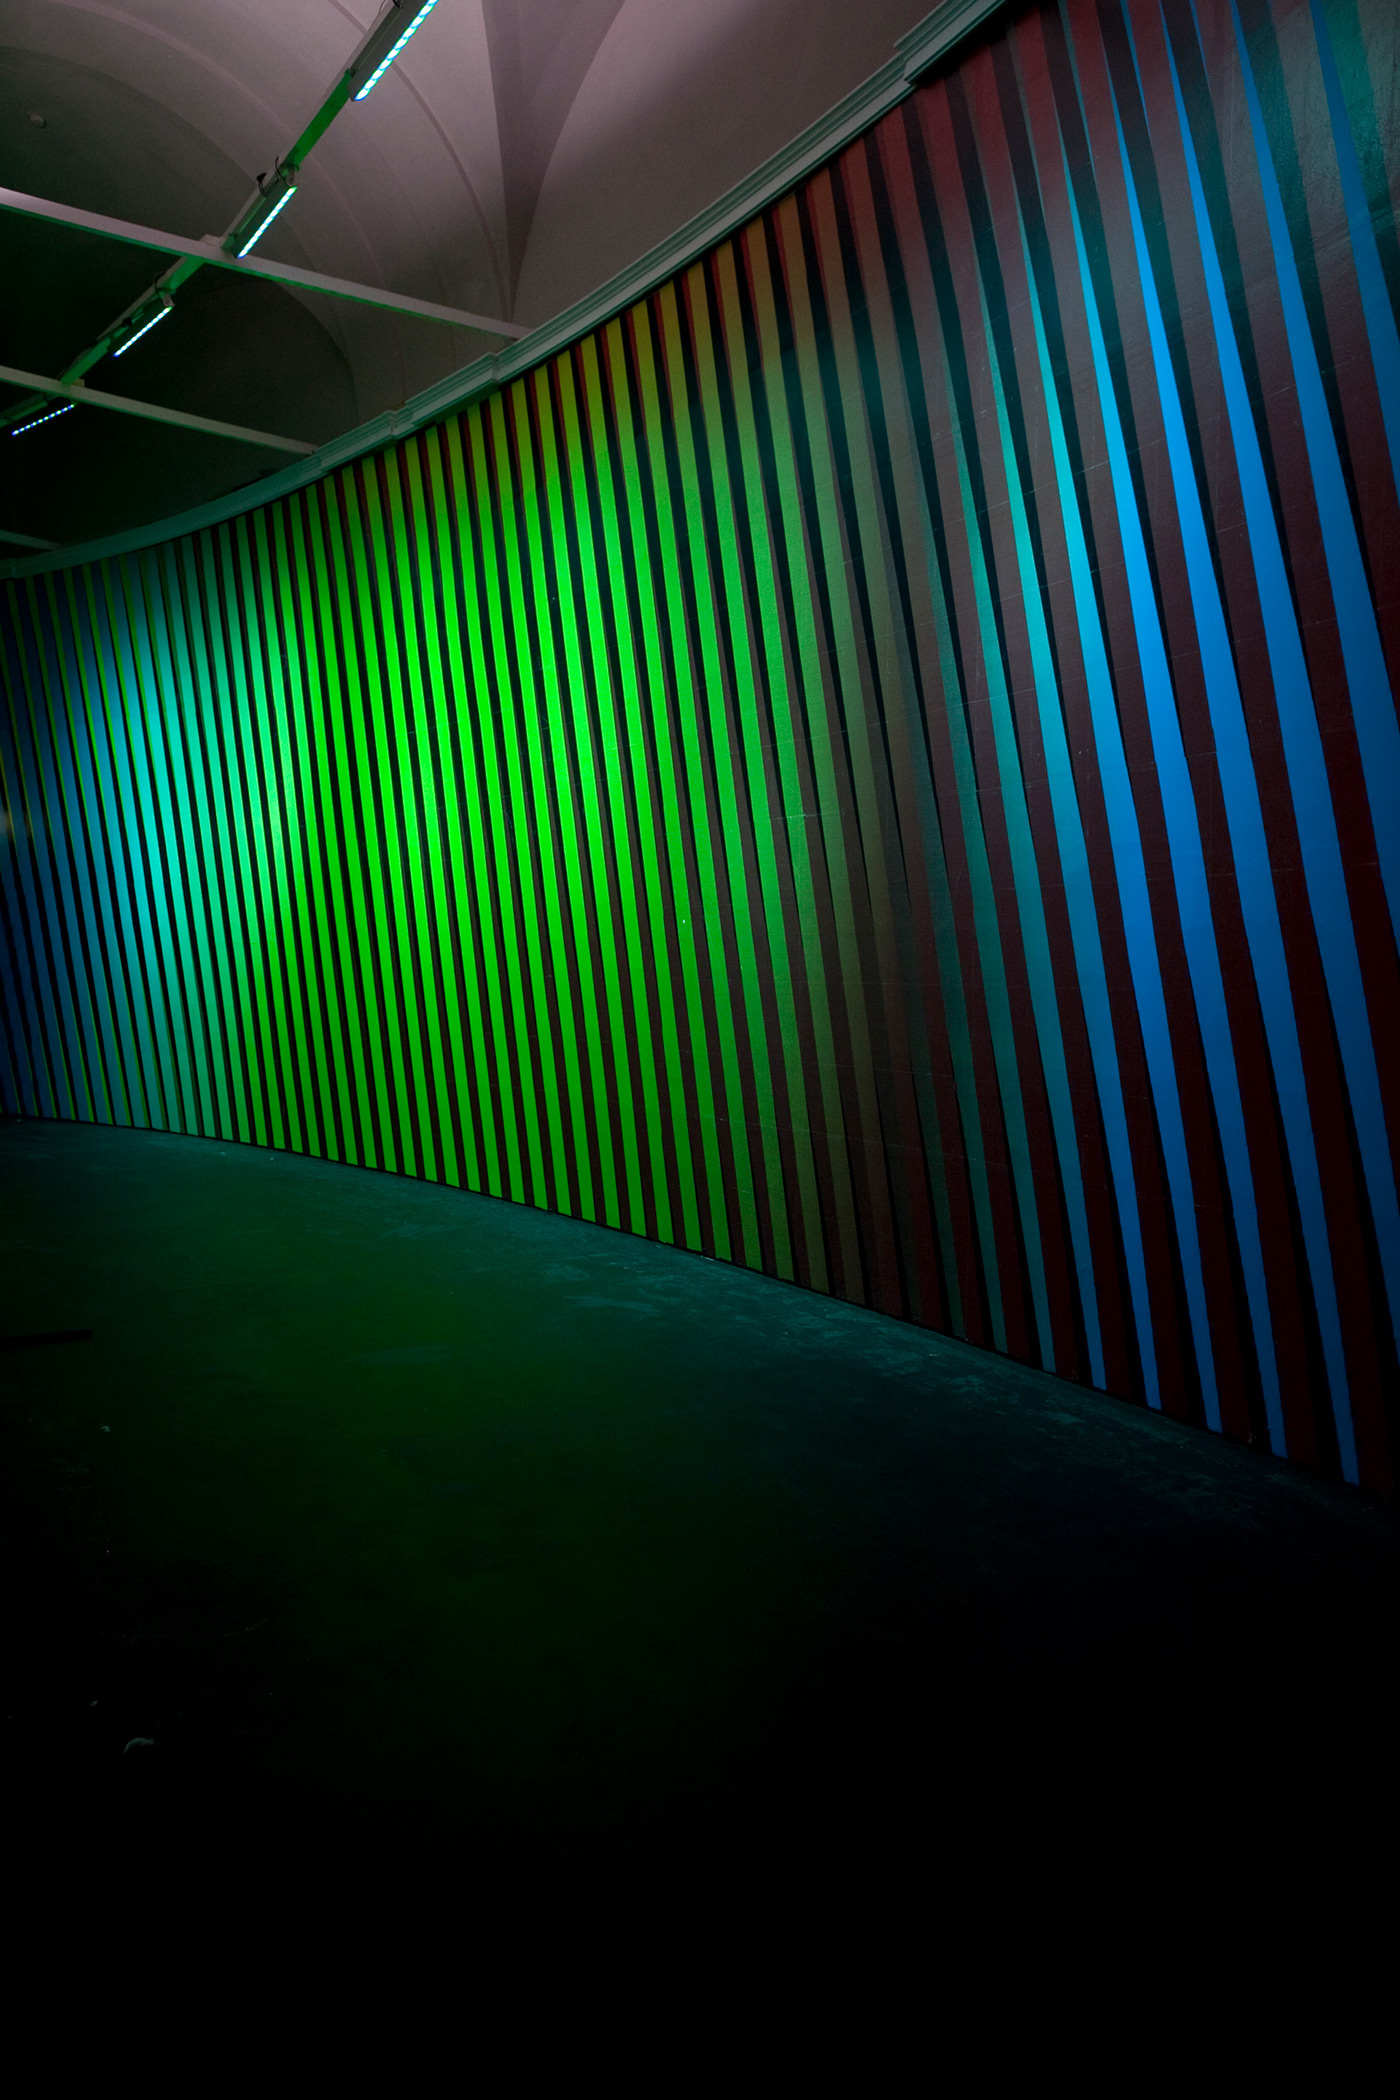 color changing wallpaper,green,blue,light,line,architecture